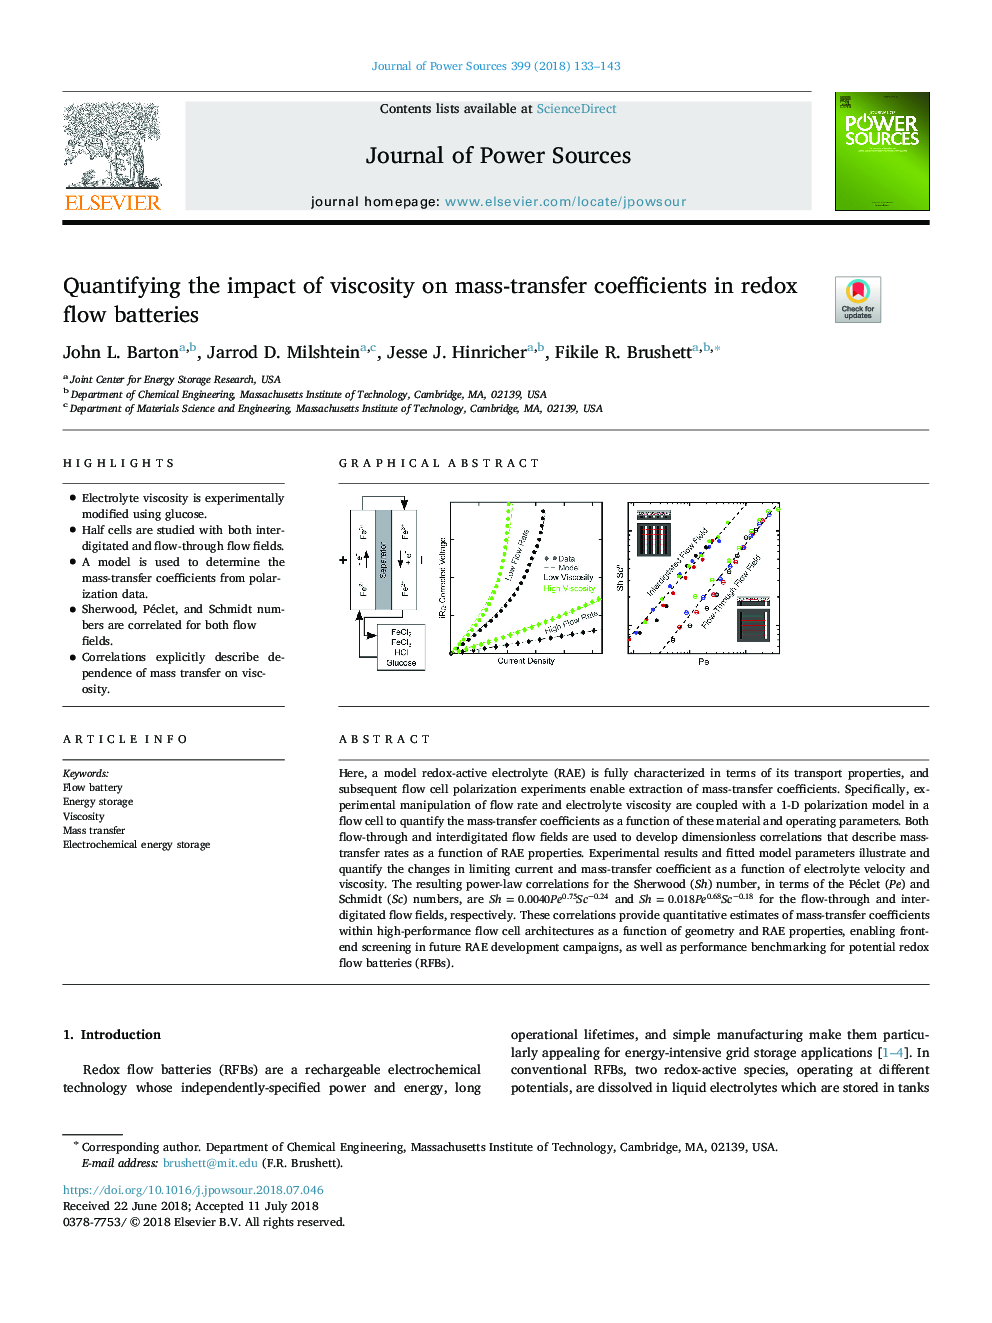 Quantifying the impact of viscosity on mass-transfer coefficients in redox flow batteries